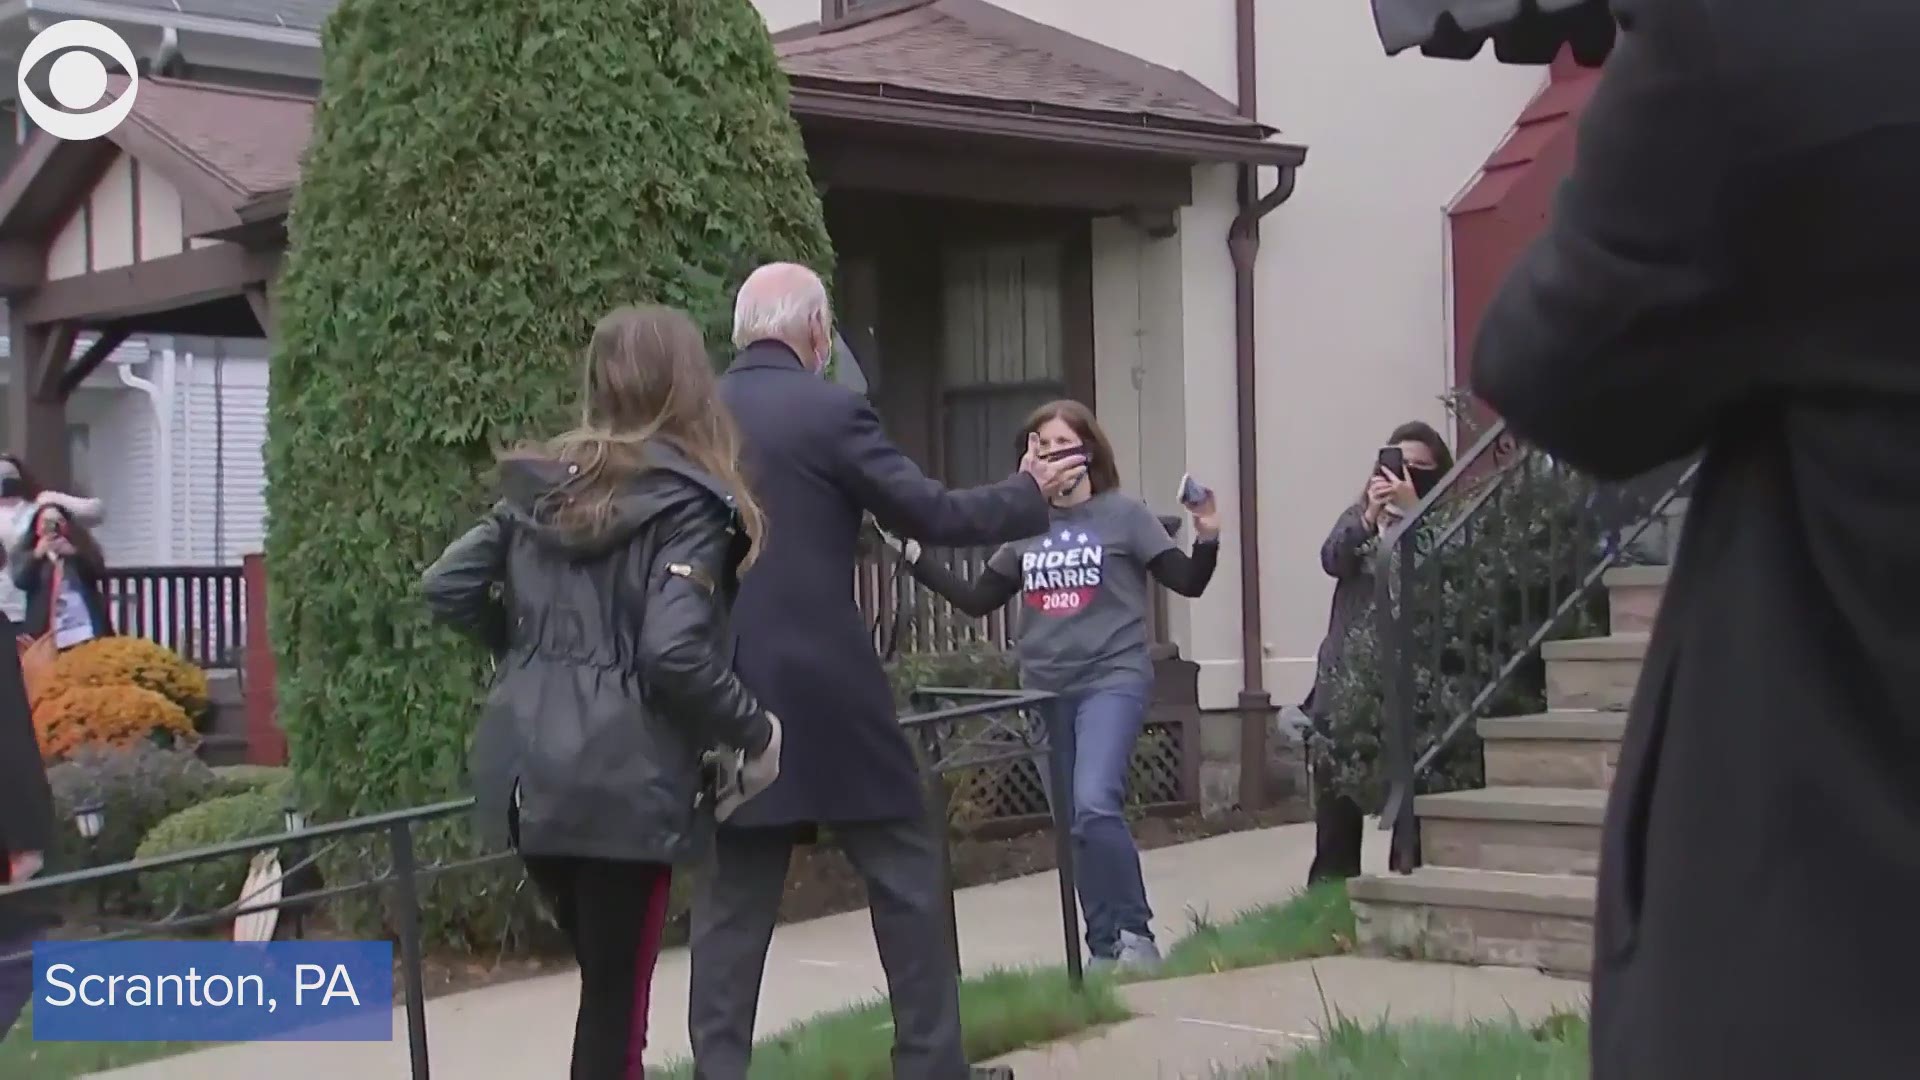 Democratic presidential nominee Joe Biden visited his childhood home in Scranton, PA on Election Day. He was greeted by a crowd & said, “It’s good to be back."